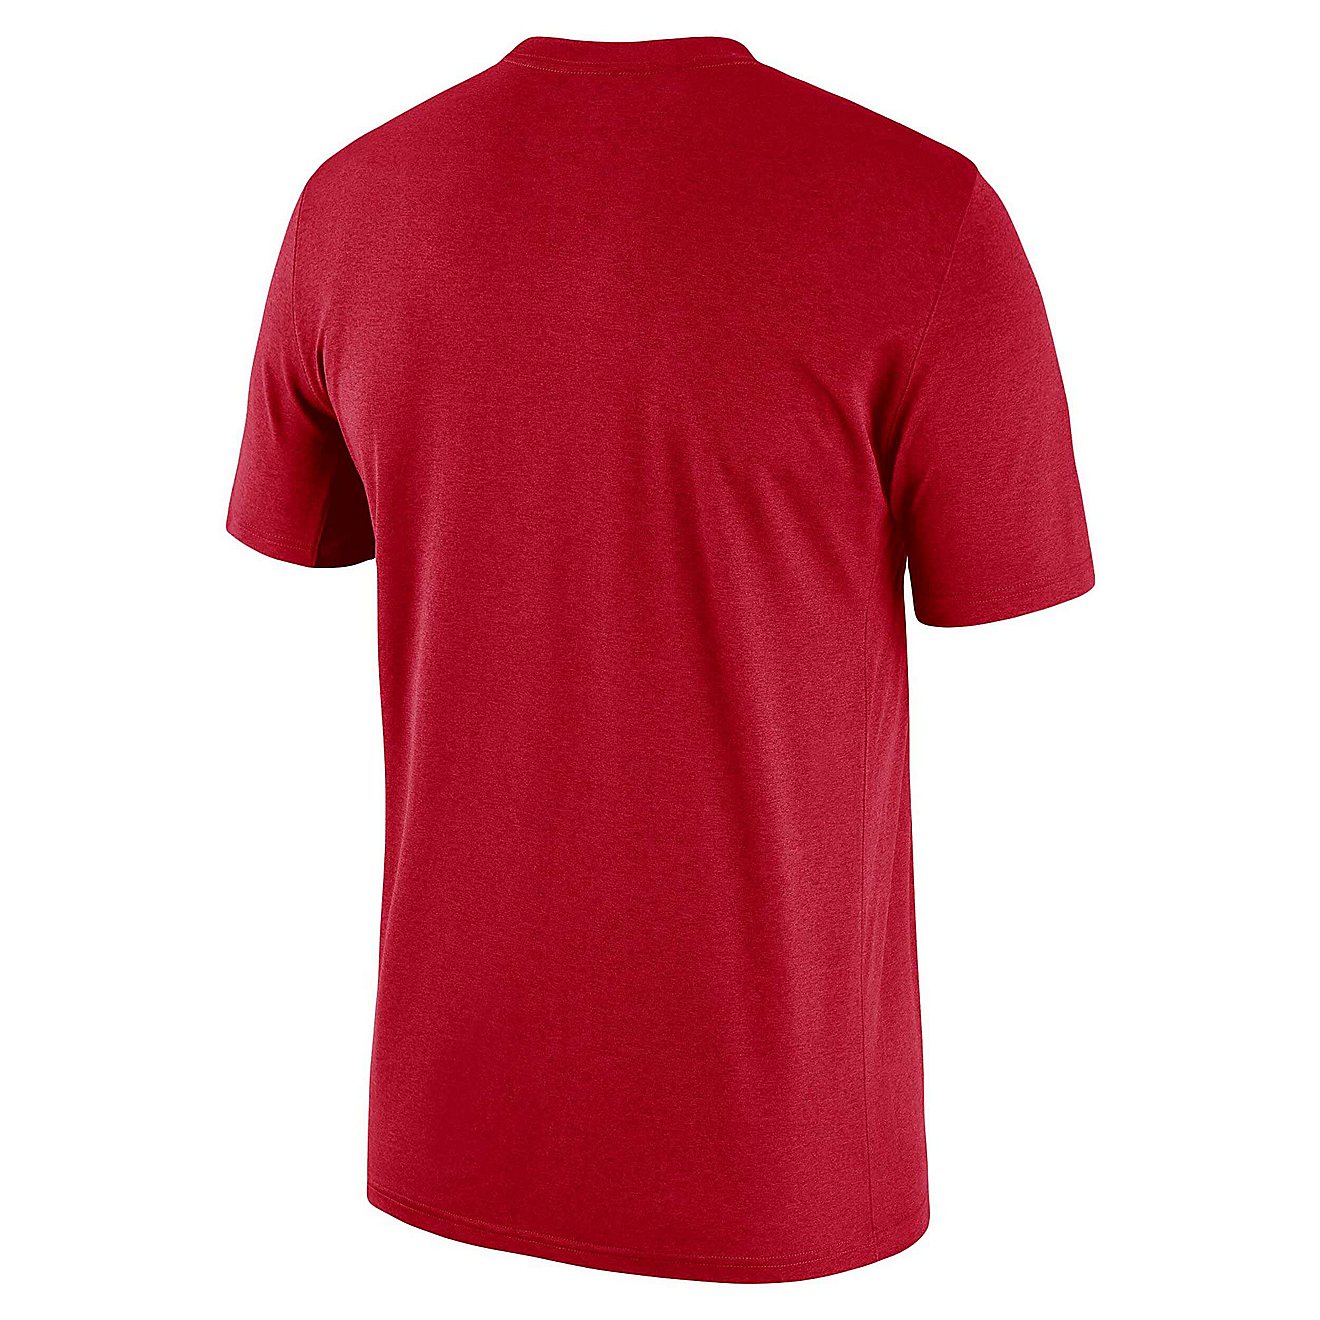 Nike Georgia Bulldogs Campus Back to School T-Shirt                                                                              - view number 3